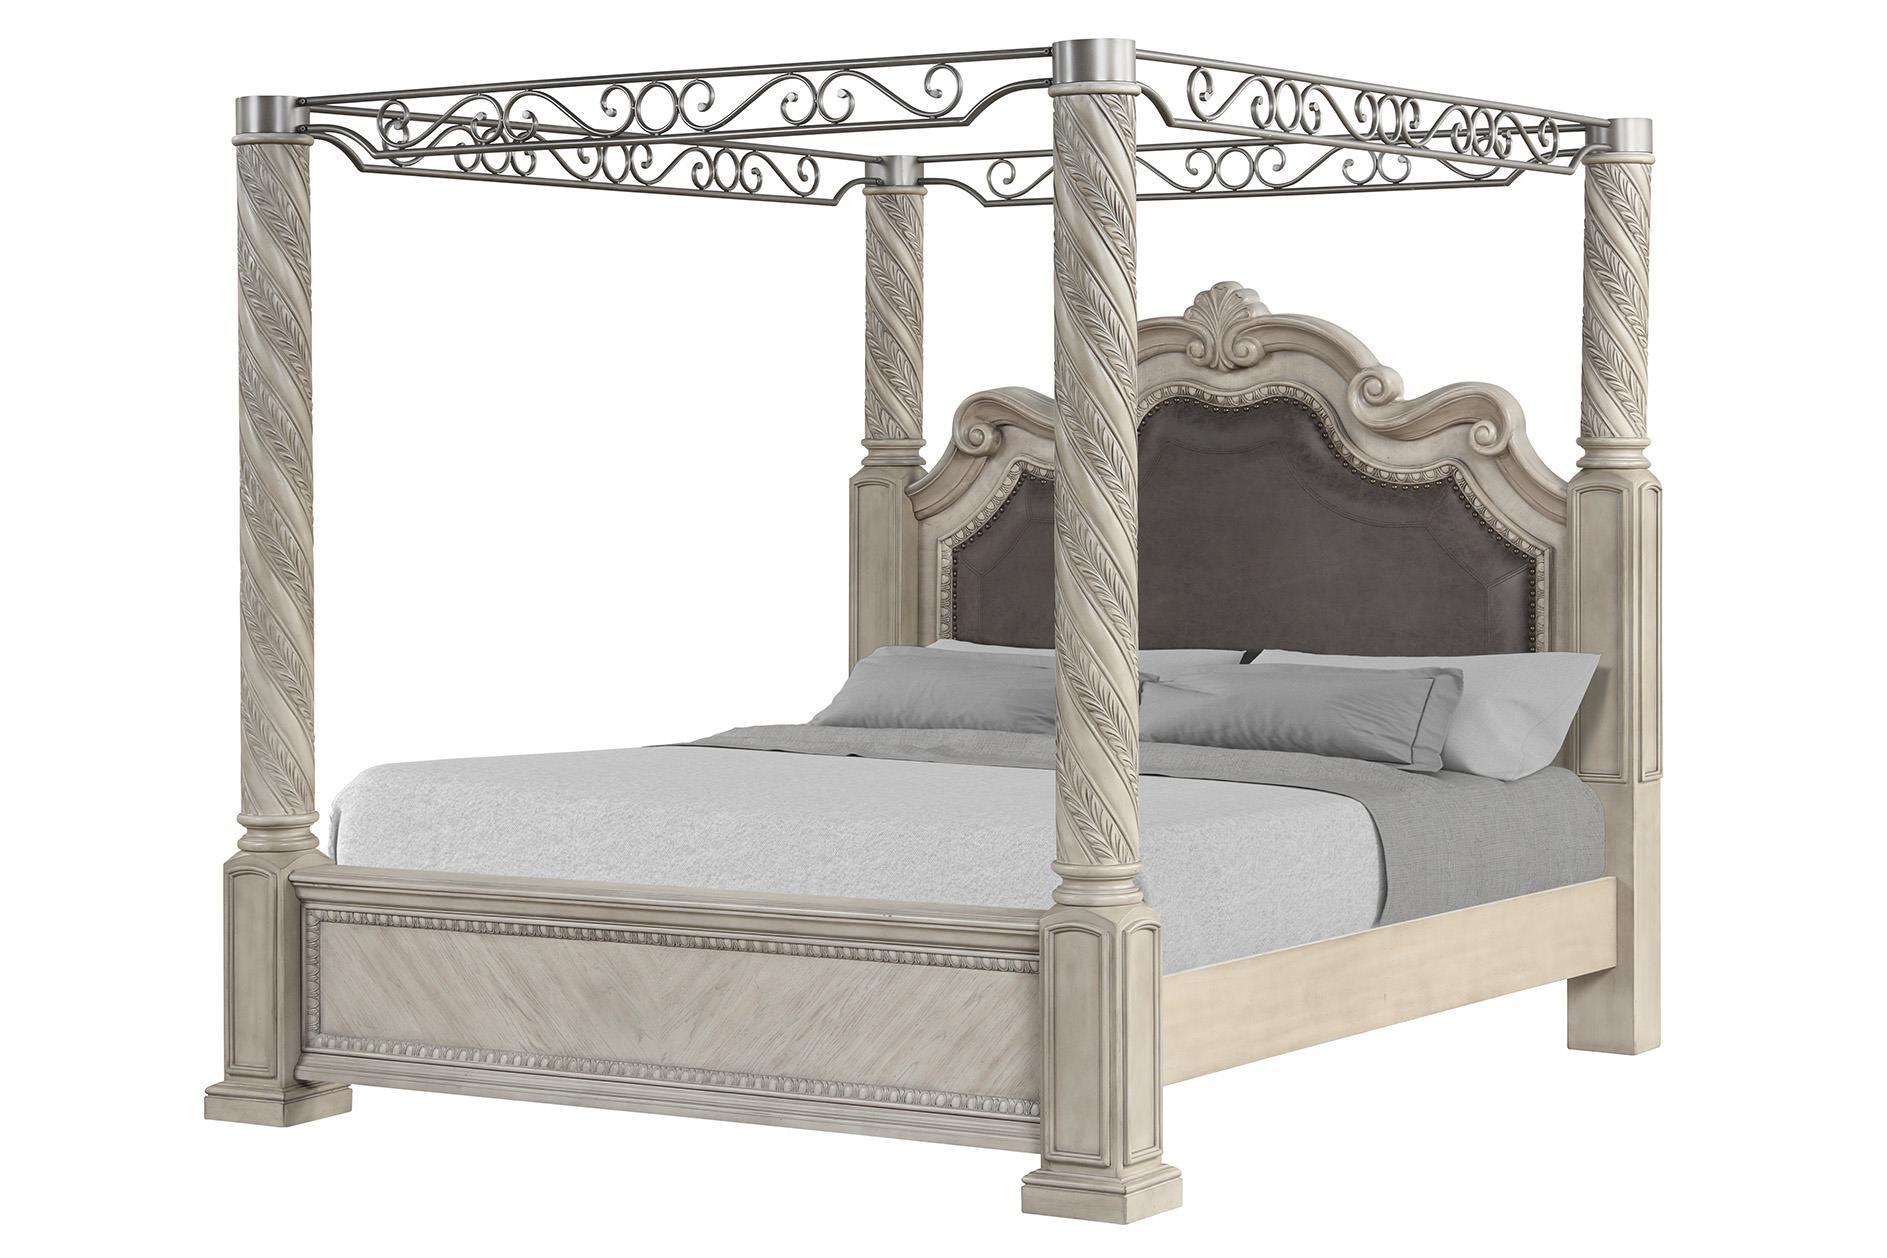 Bernards Furniture COVENTRY 1989-108 Canopy Bed